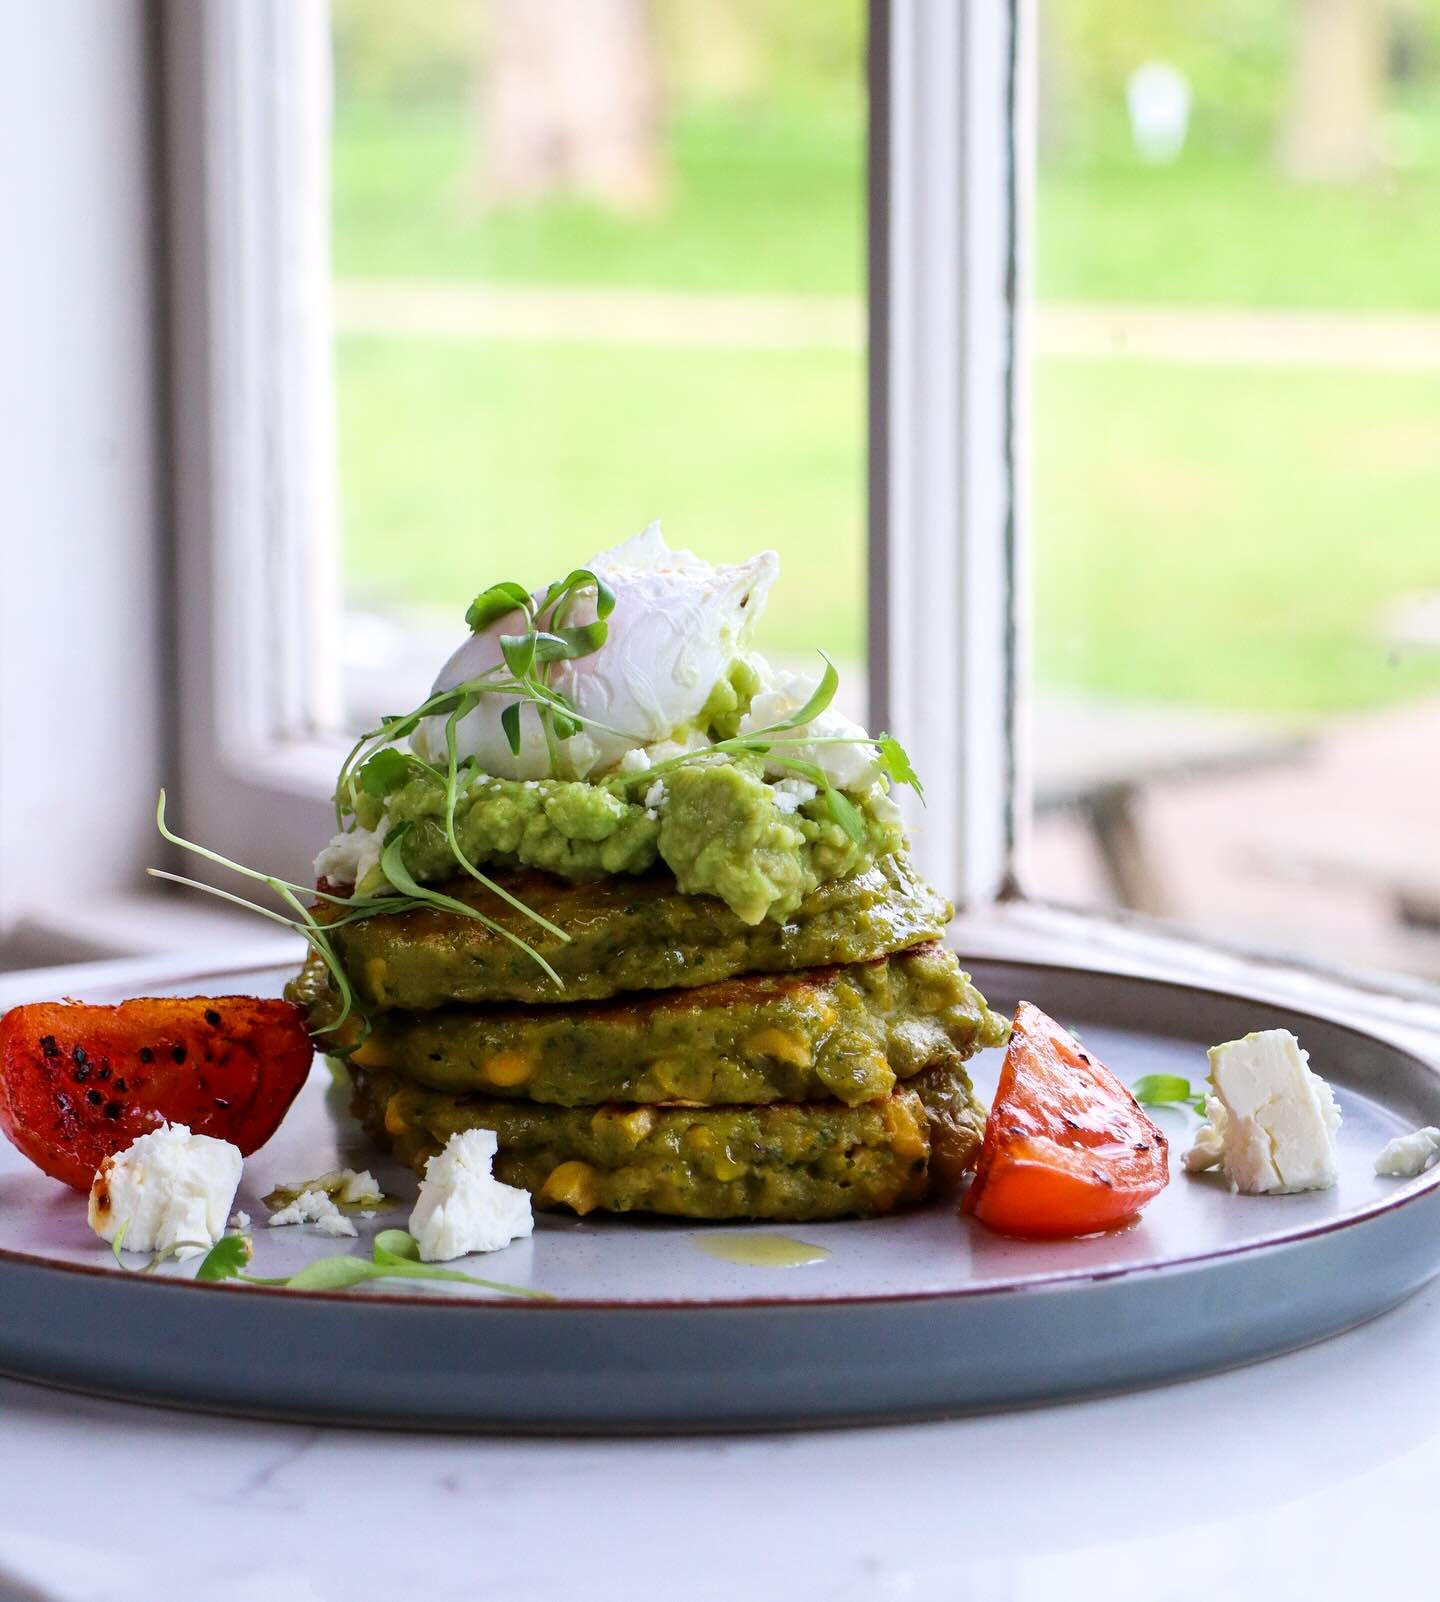 Your Bank Holiday brunch could look like this&hellip;👆🏼

🥑 Sweetcorn fritters with avo, slow roasted tomatoes, feta &amp; coriander. Top with a poached egg 🍳
 
📍Available on the Common